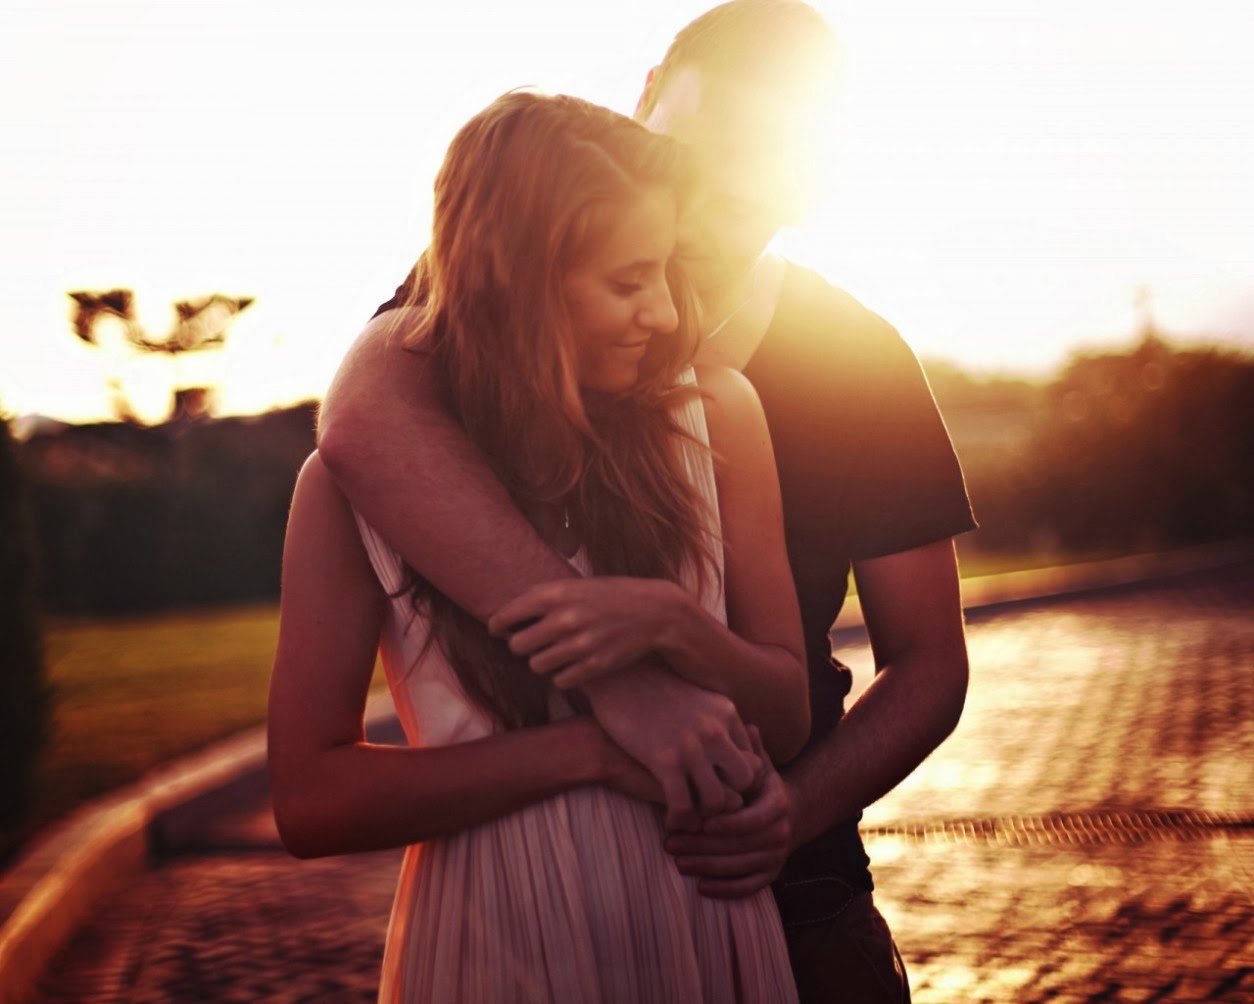 Love Romantic Boys And Girls Wallpapers And Pictures 2014